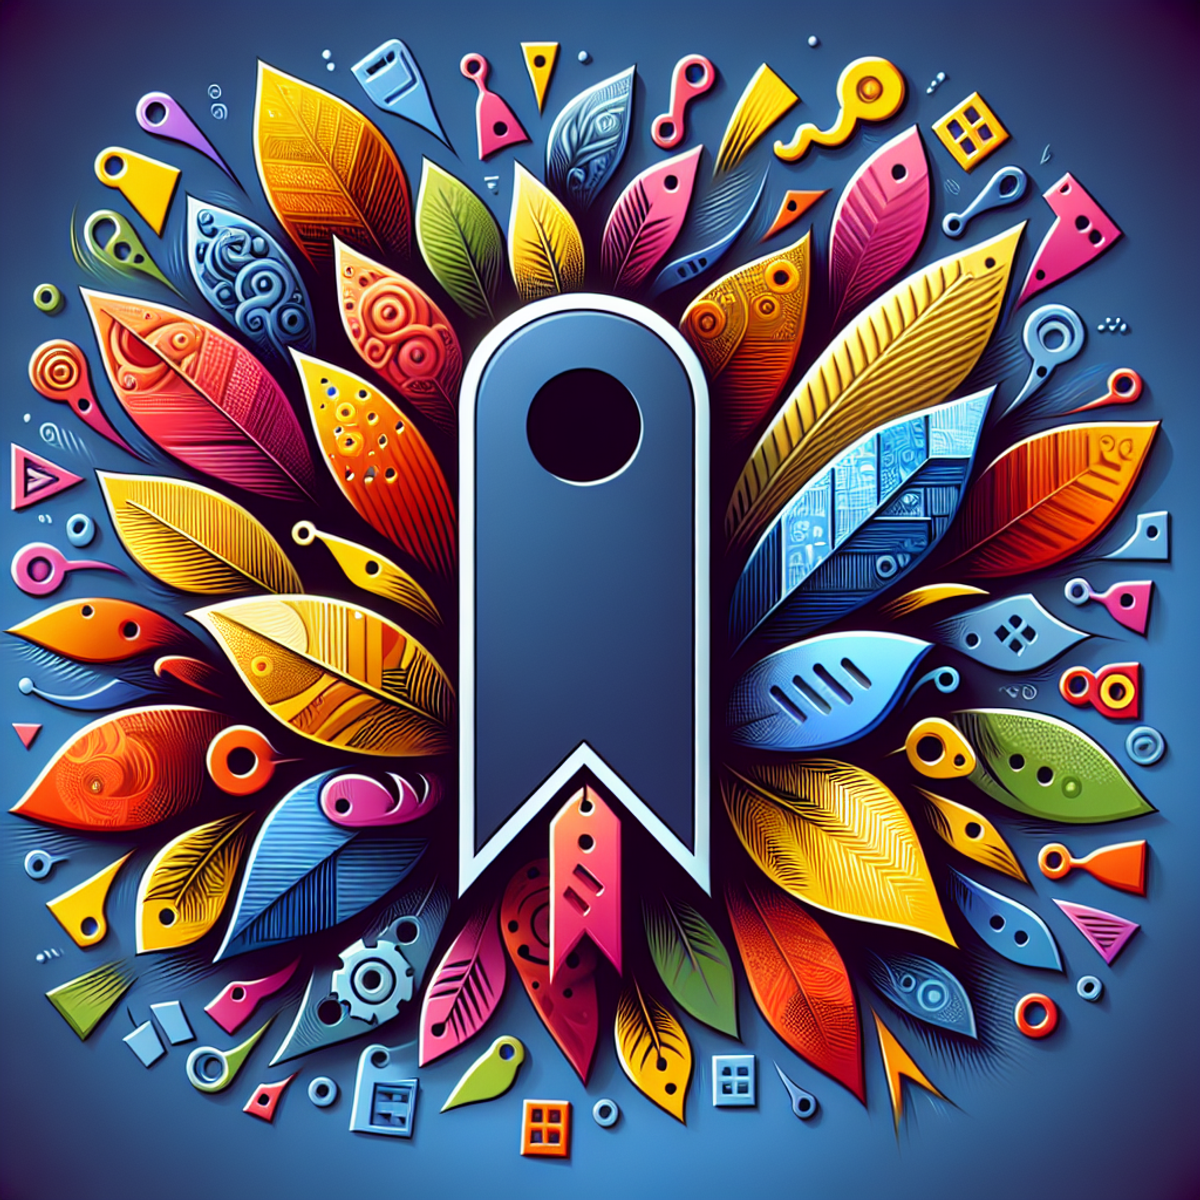 A vibrant image of a bold, stand-out bookmark surrounded by a multicolor array of distinctive tags representing categorization and organization of information.